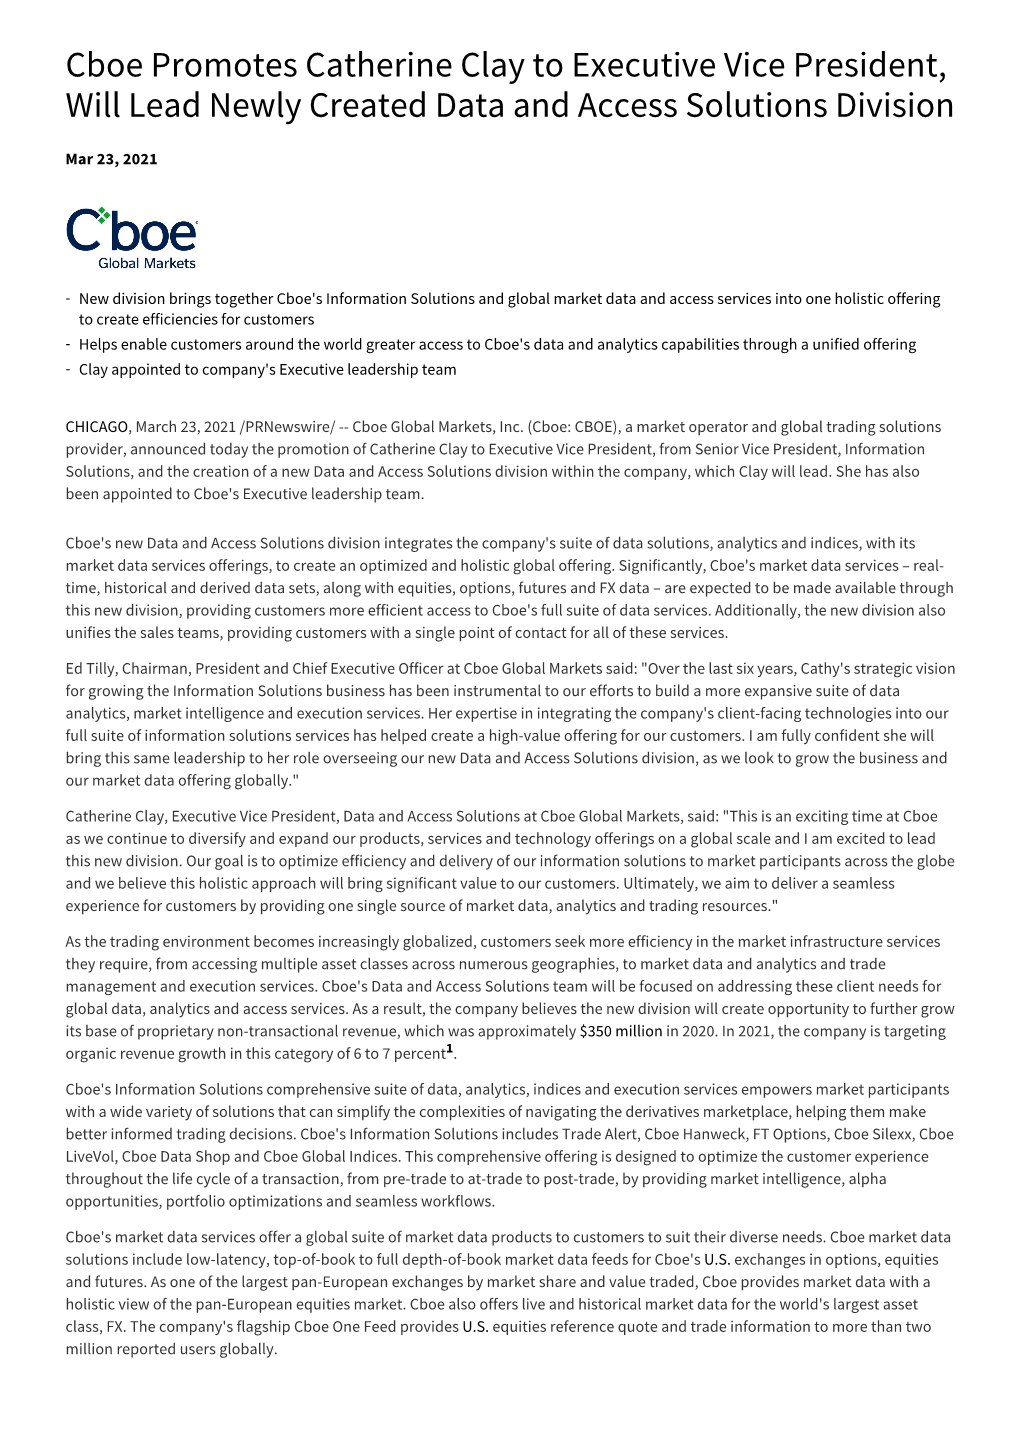 Cboe Promotes Catherine Clay to Executive Vice President, Will Lead Newly Created Data and Access Solutions Division